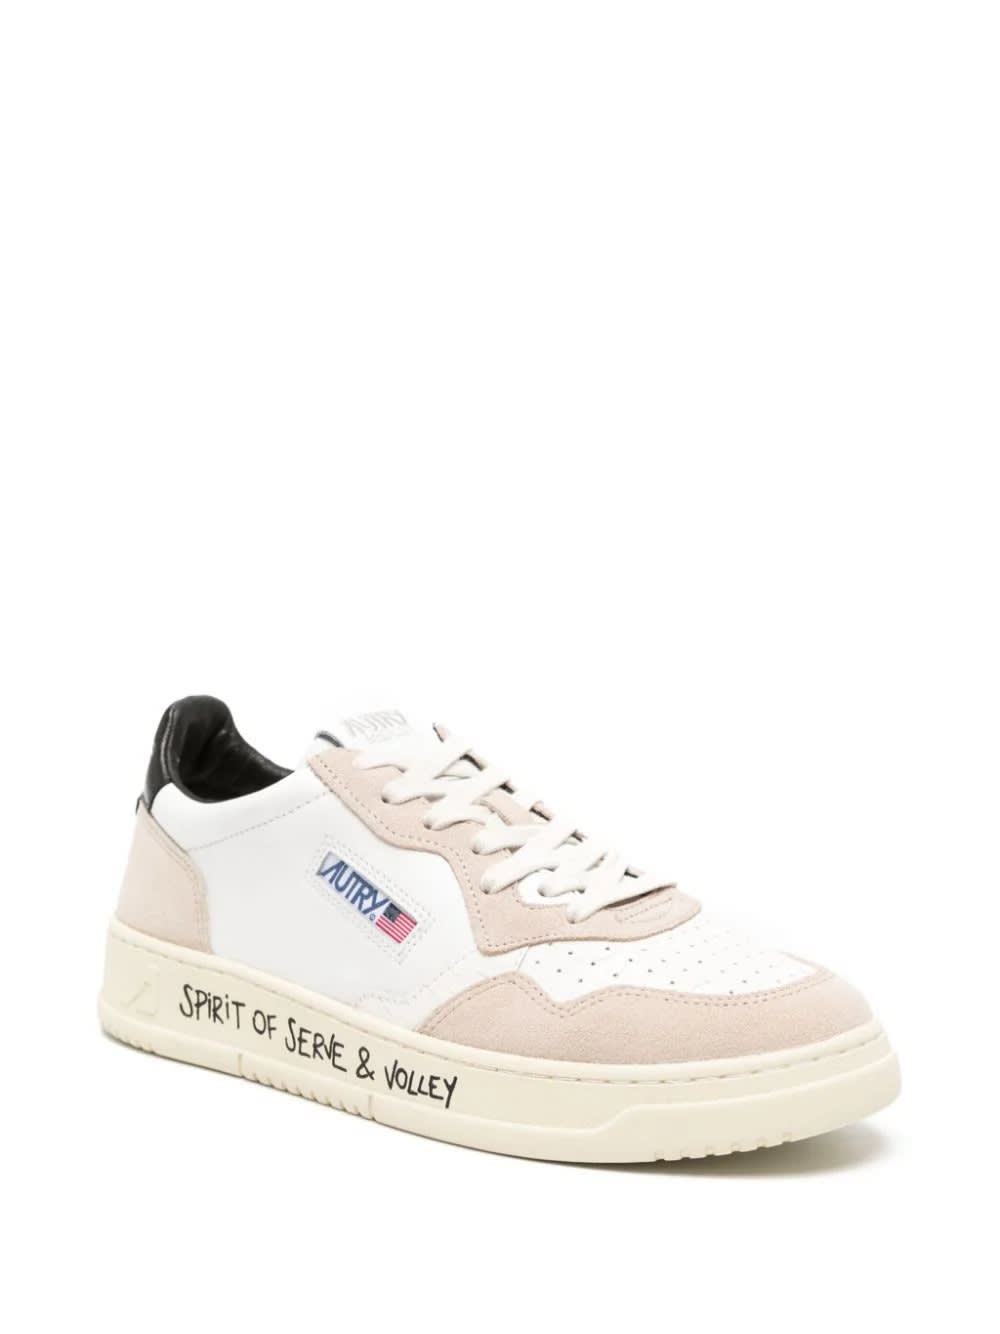 Shop Autry Medalist Low Sneakers In White And Black Suede And Leather